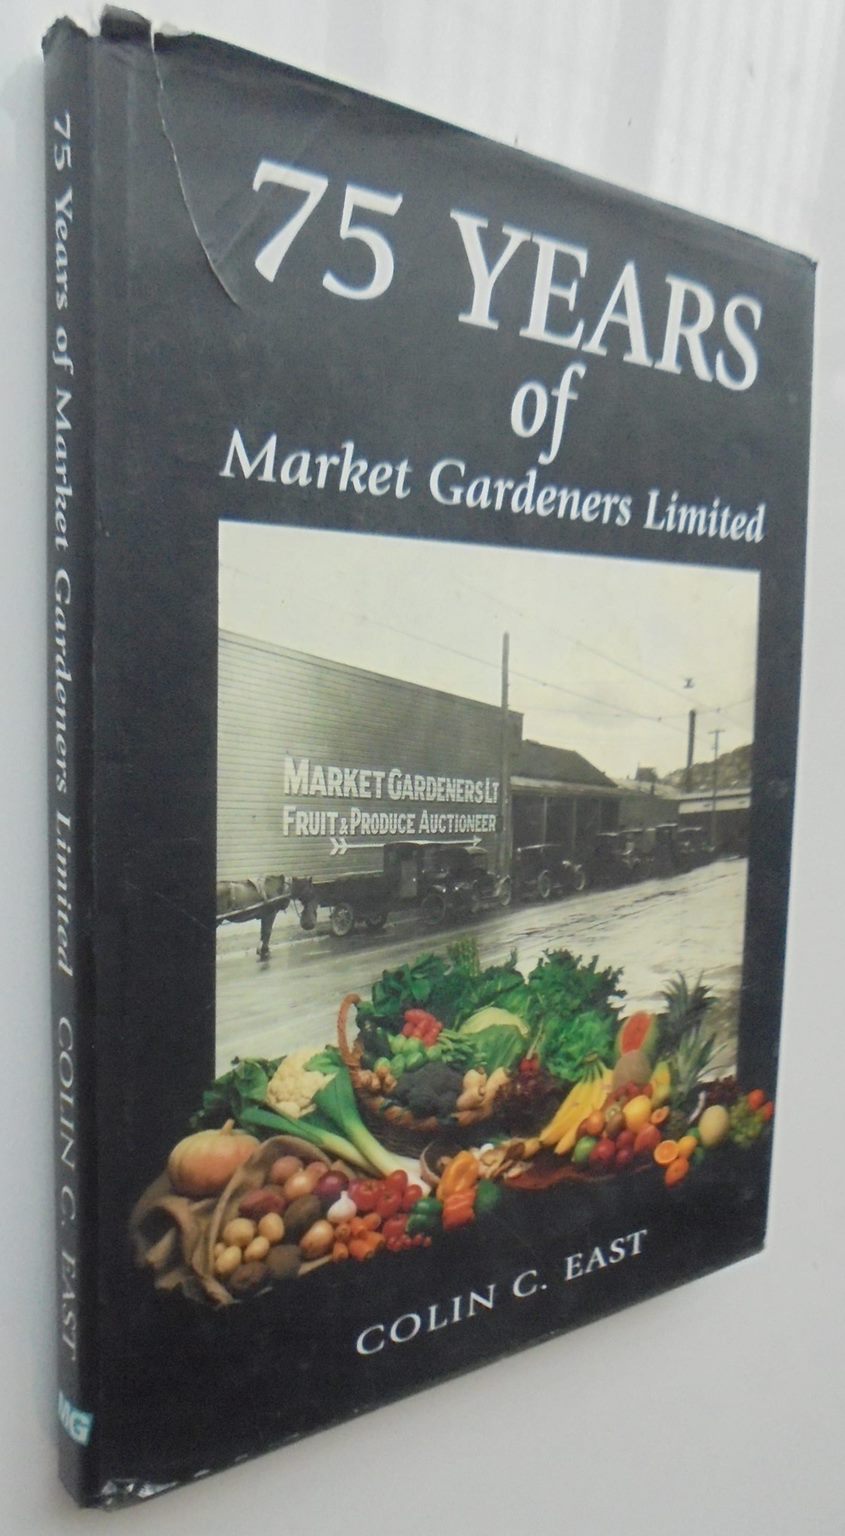 75 Years of Market Gardeners Unlimited. By Colin C. East